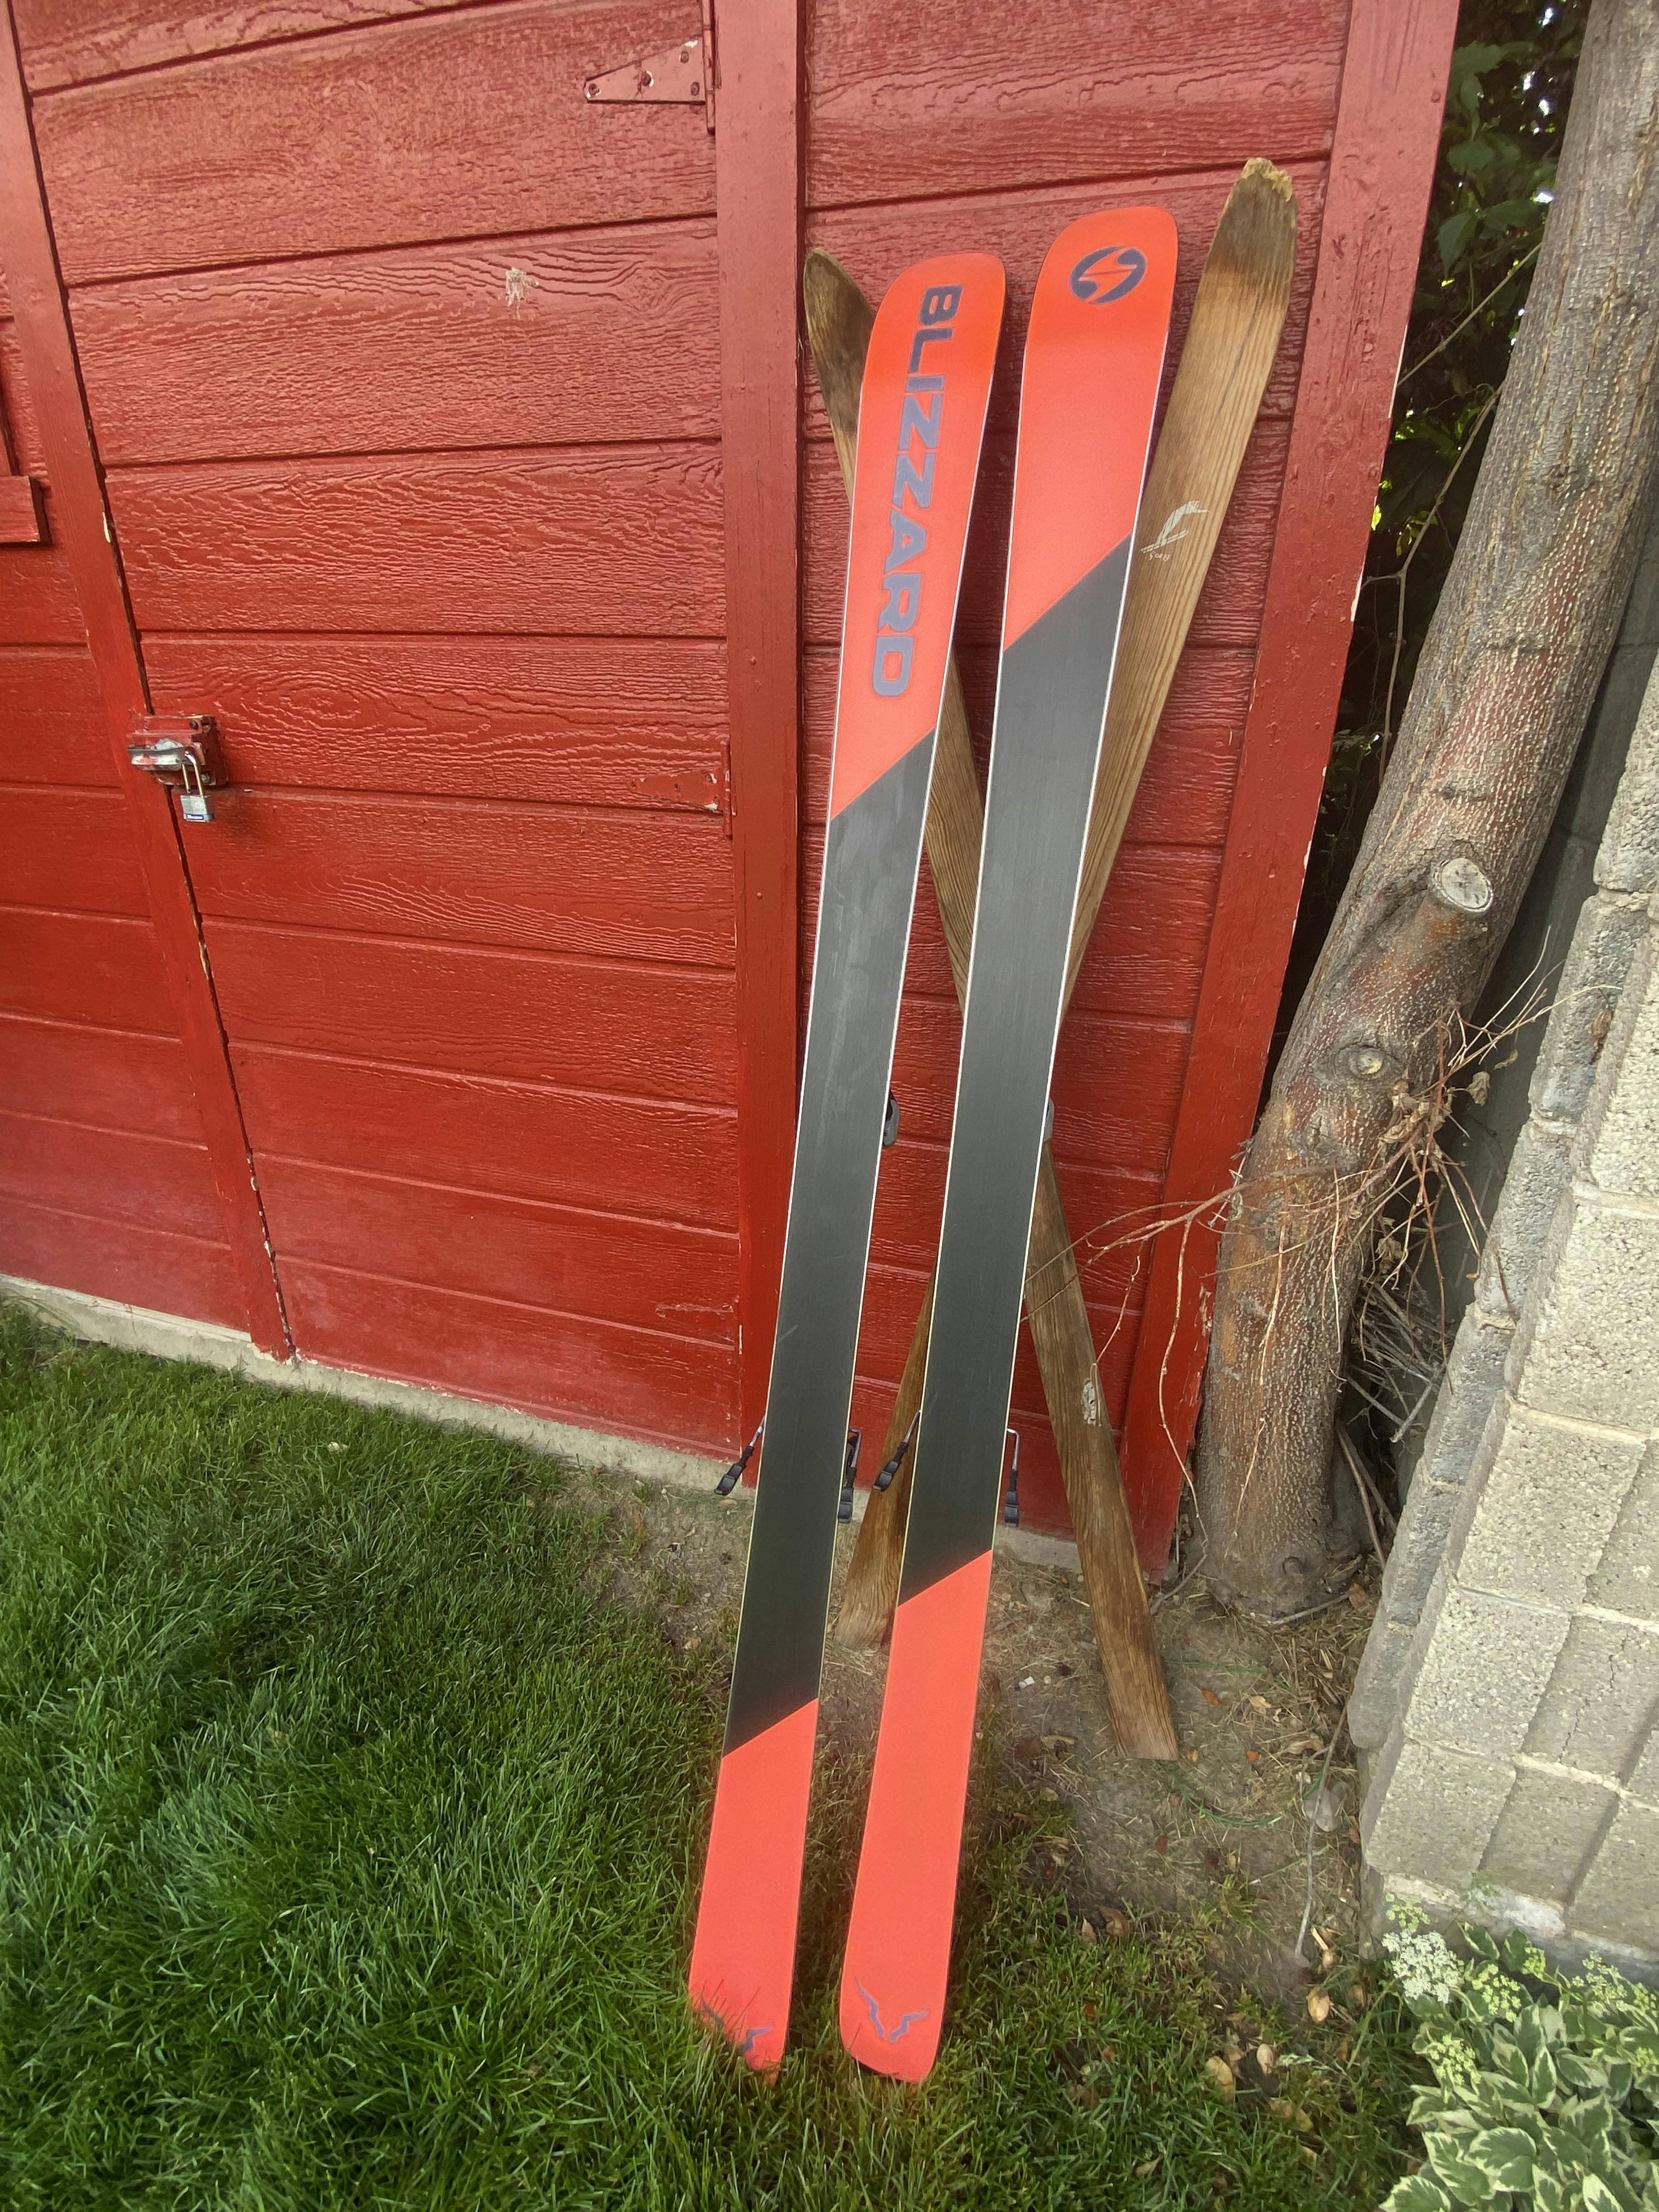 The bottom of the Blizzard Brahma 88 skis.